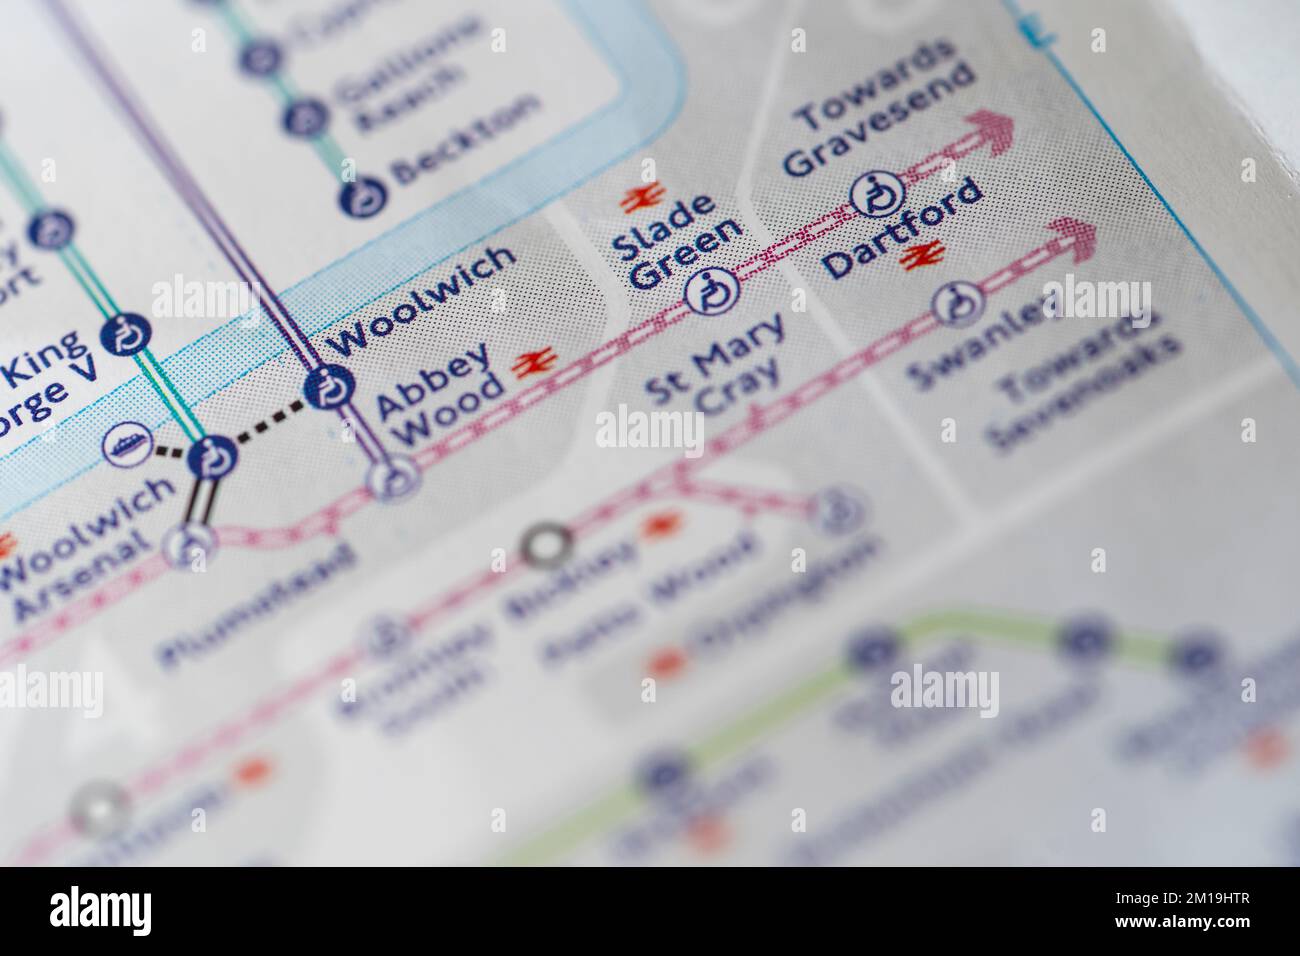 Macro closeup with a shallow depth of field of a London Underground Tube Map showing zones and Woolwich tube station Stock Photo